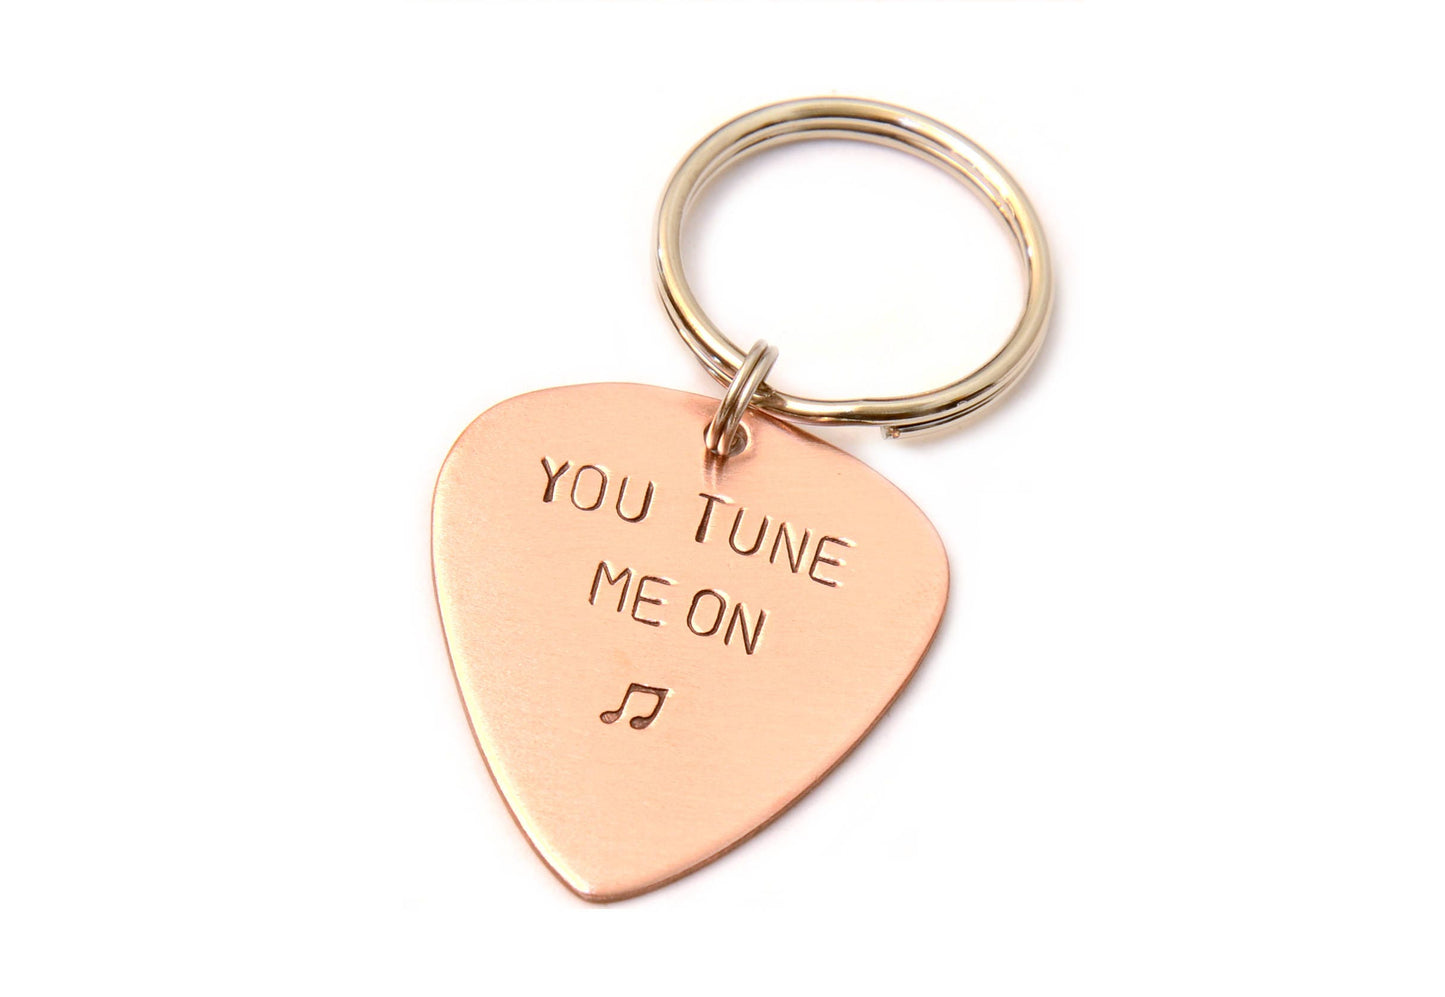 Playable guitar pick key chain you tune me on in copper